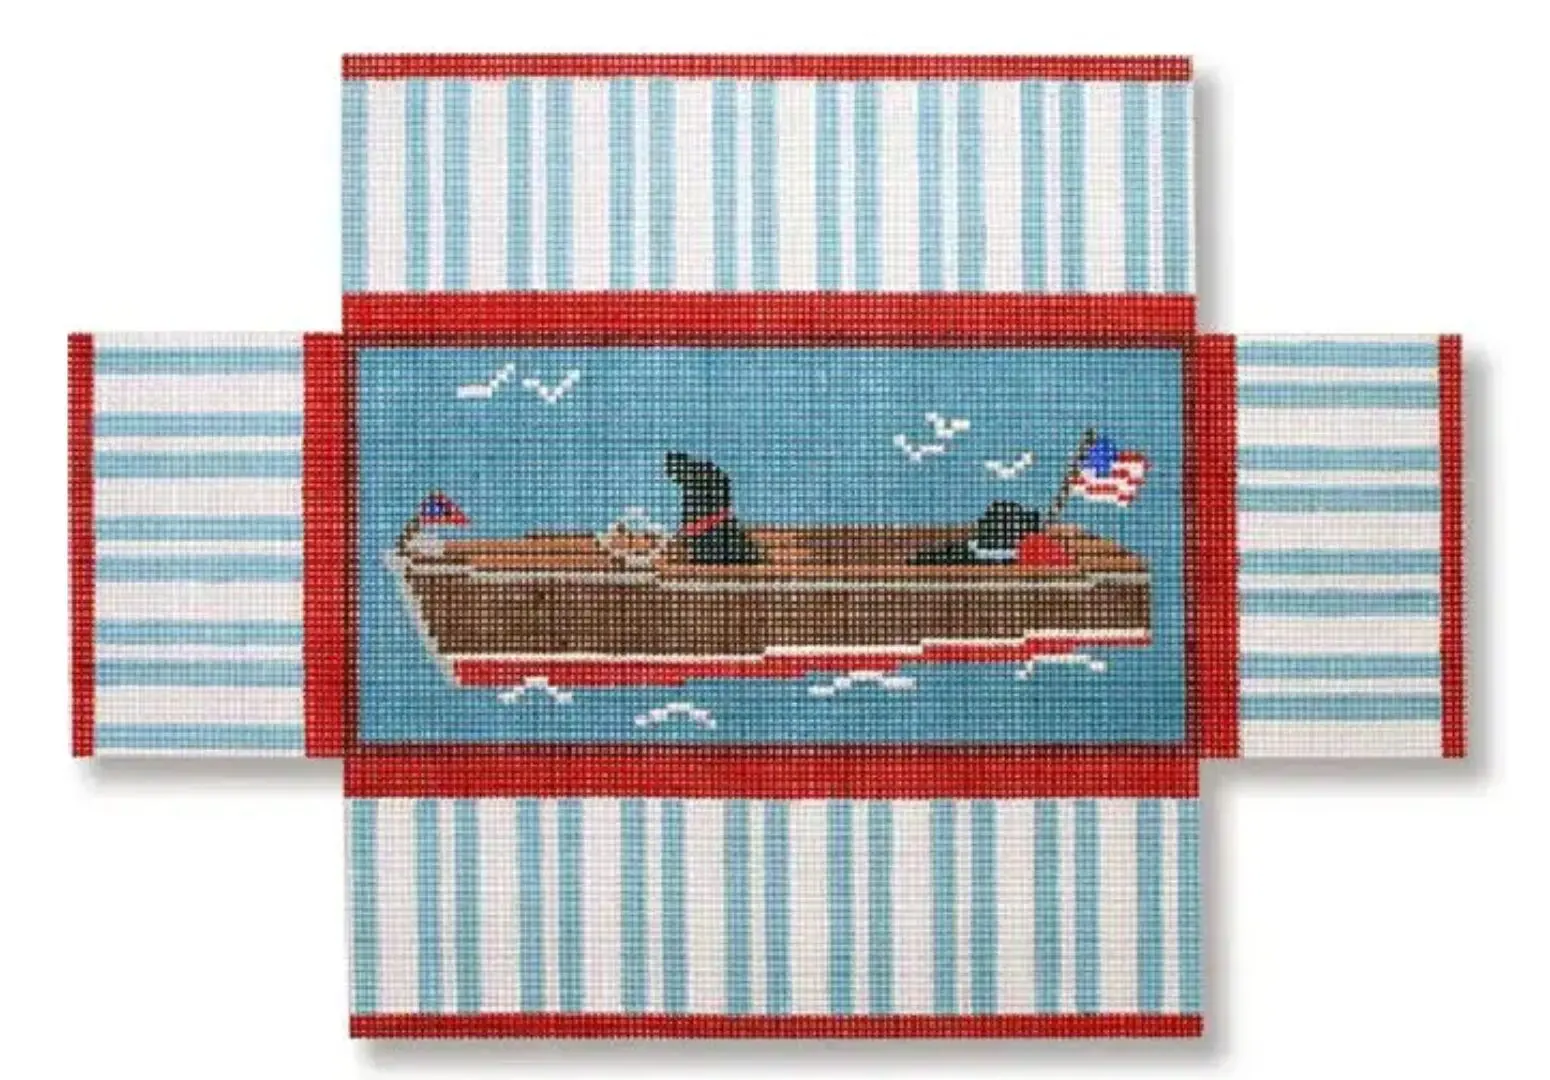 A Cecilia Ohm Eriksen cross stitch kit featuring two dogs in a boat.